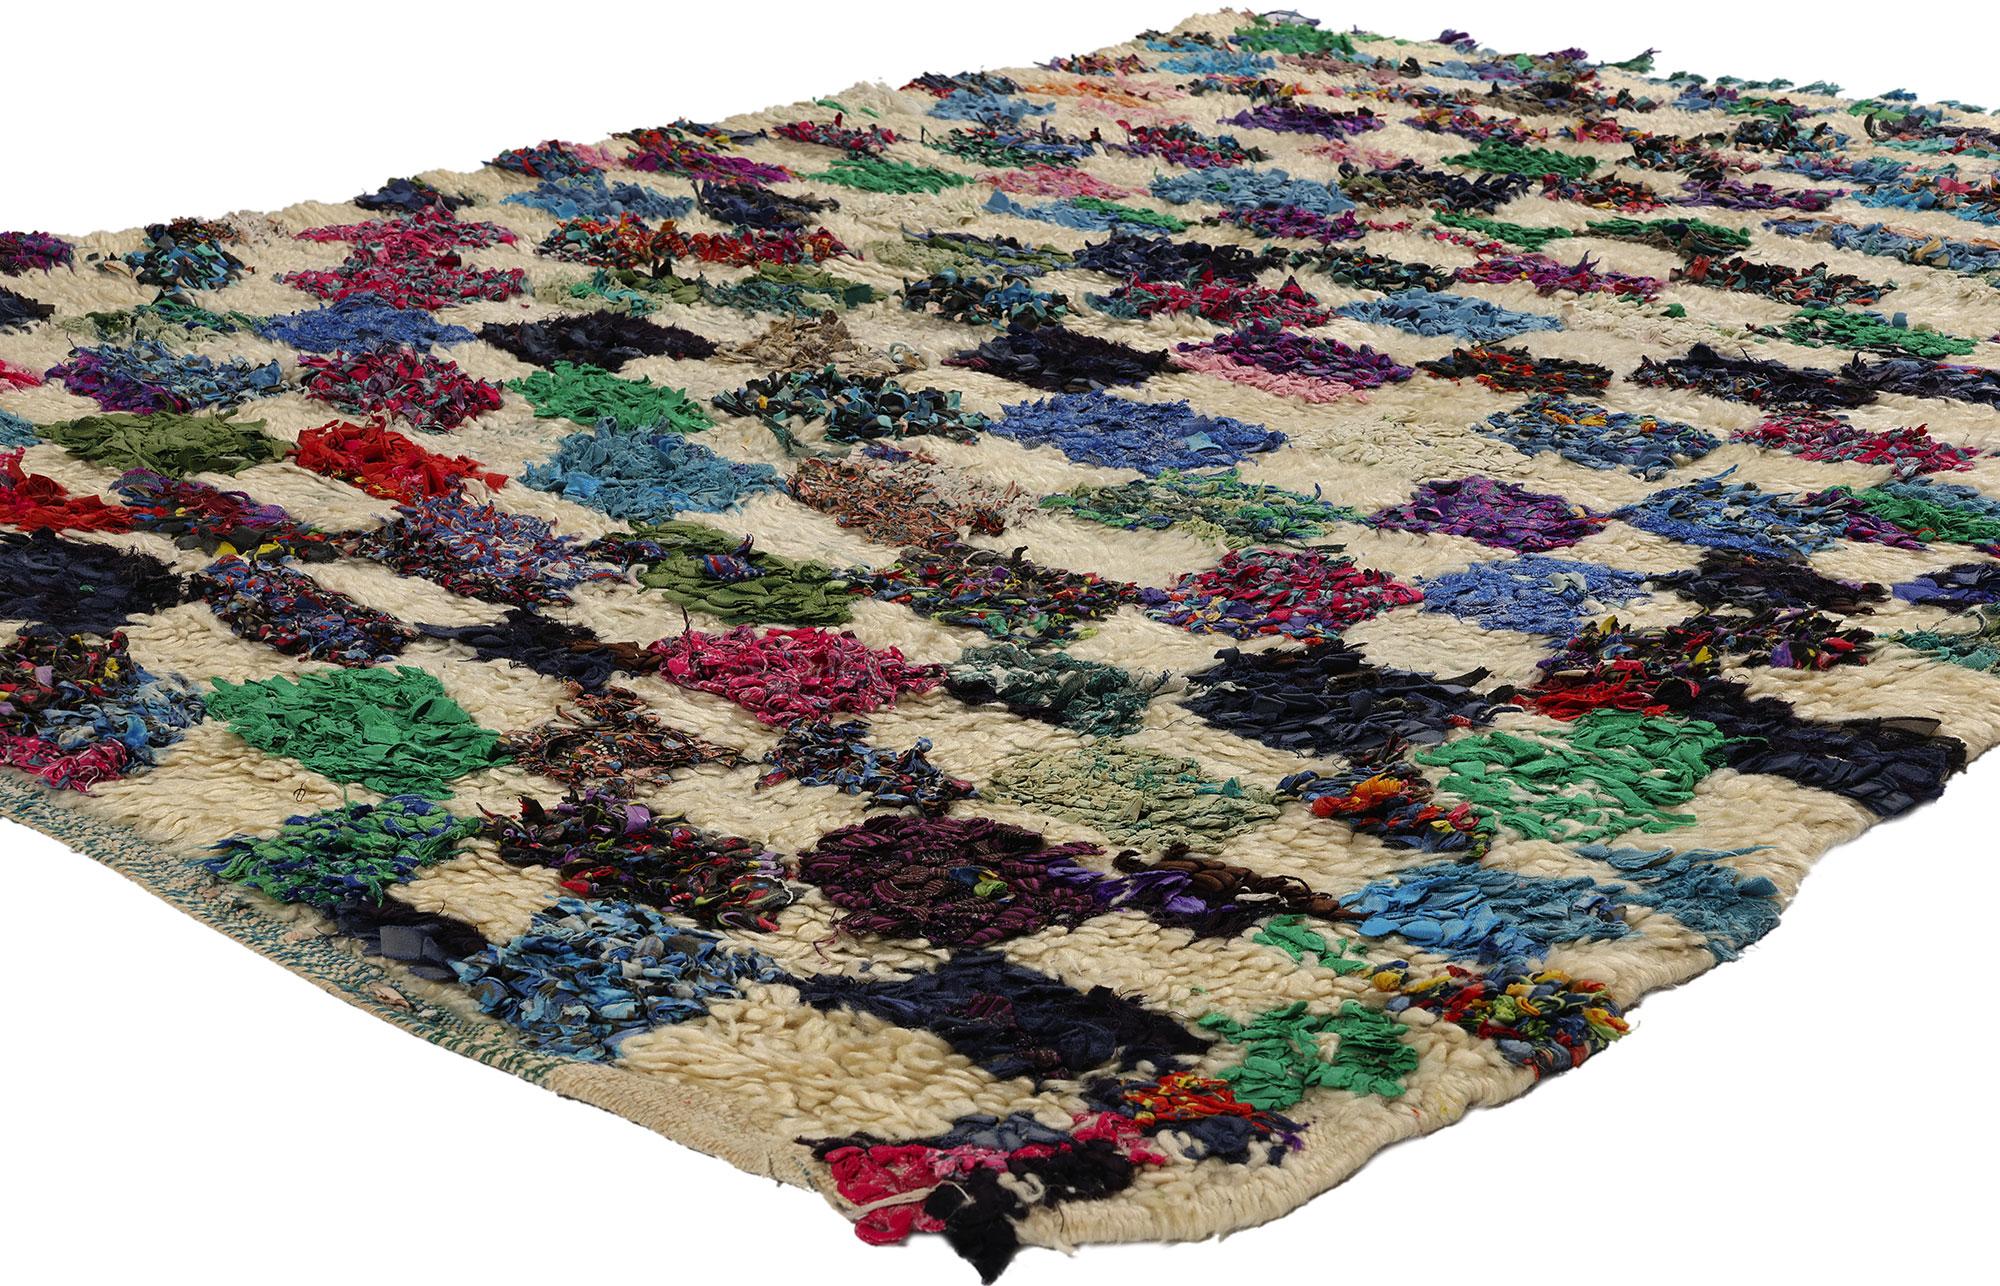 21741 Vintage Boucherouite Moroccan Azilal Rag Rug, 05'03 x 06'05. Azilal rag rugs, celebrated as Azilal Boucherouite masterpieces, embark on a striking journey of sustainable artistry resonating from the heart of the Azilal region in the Atlas